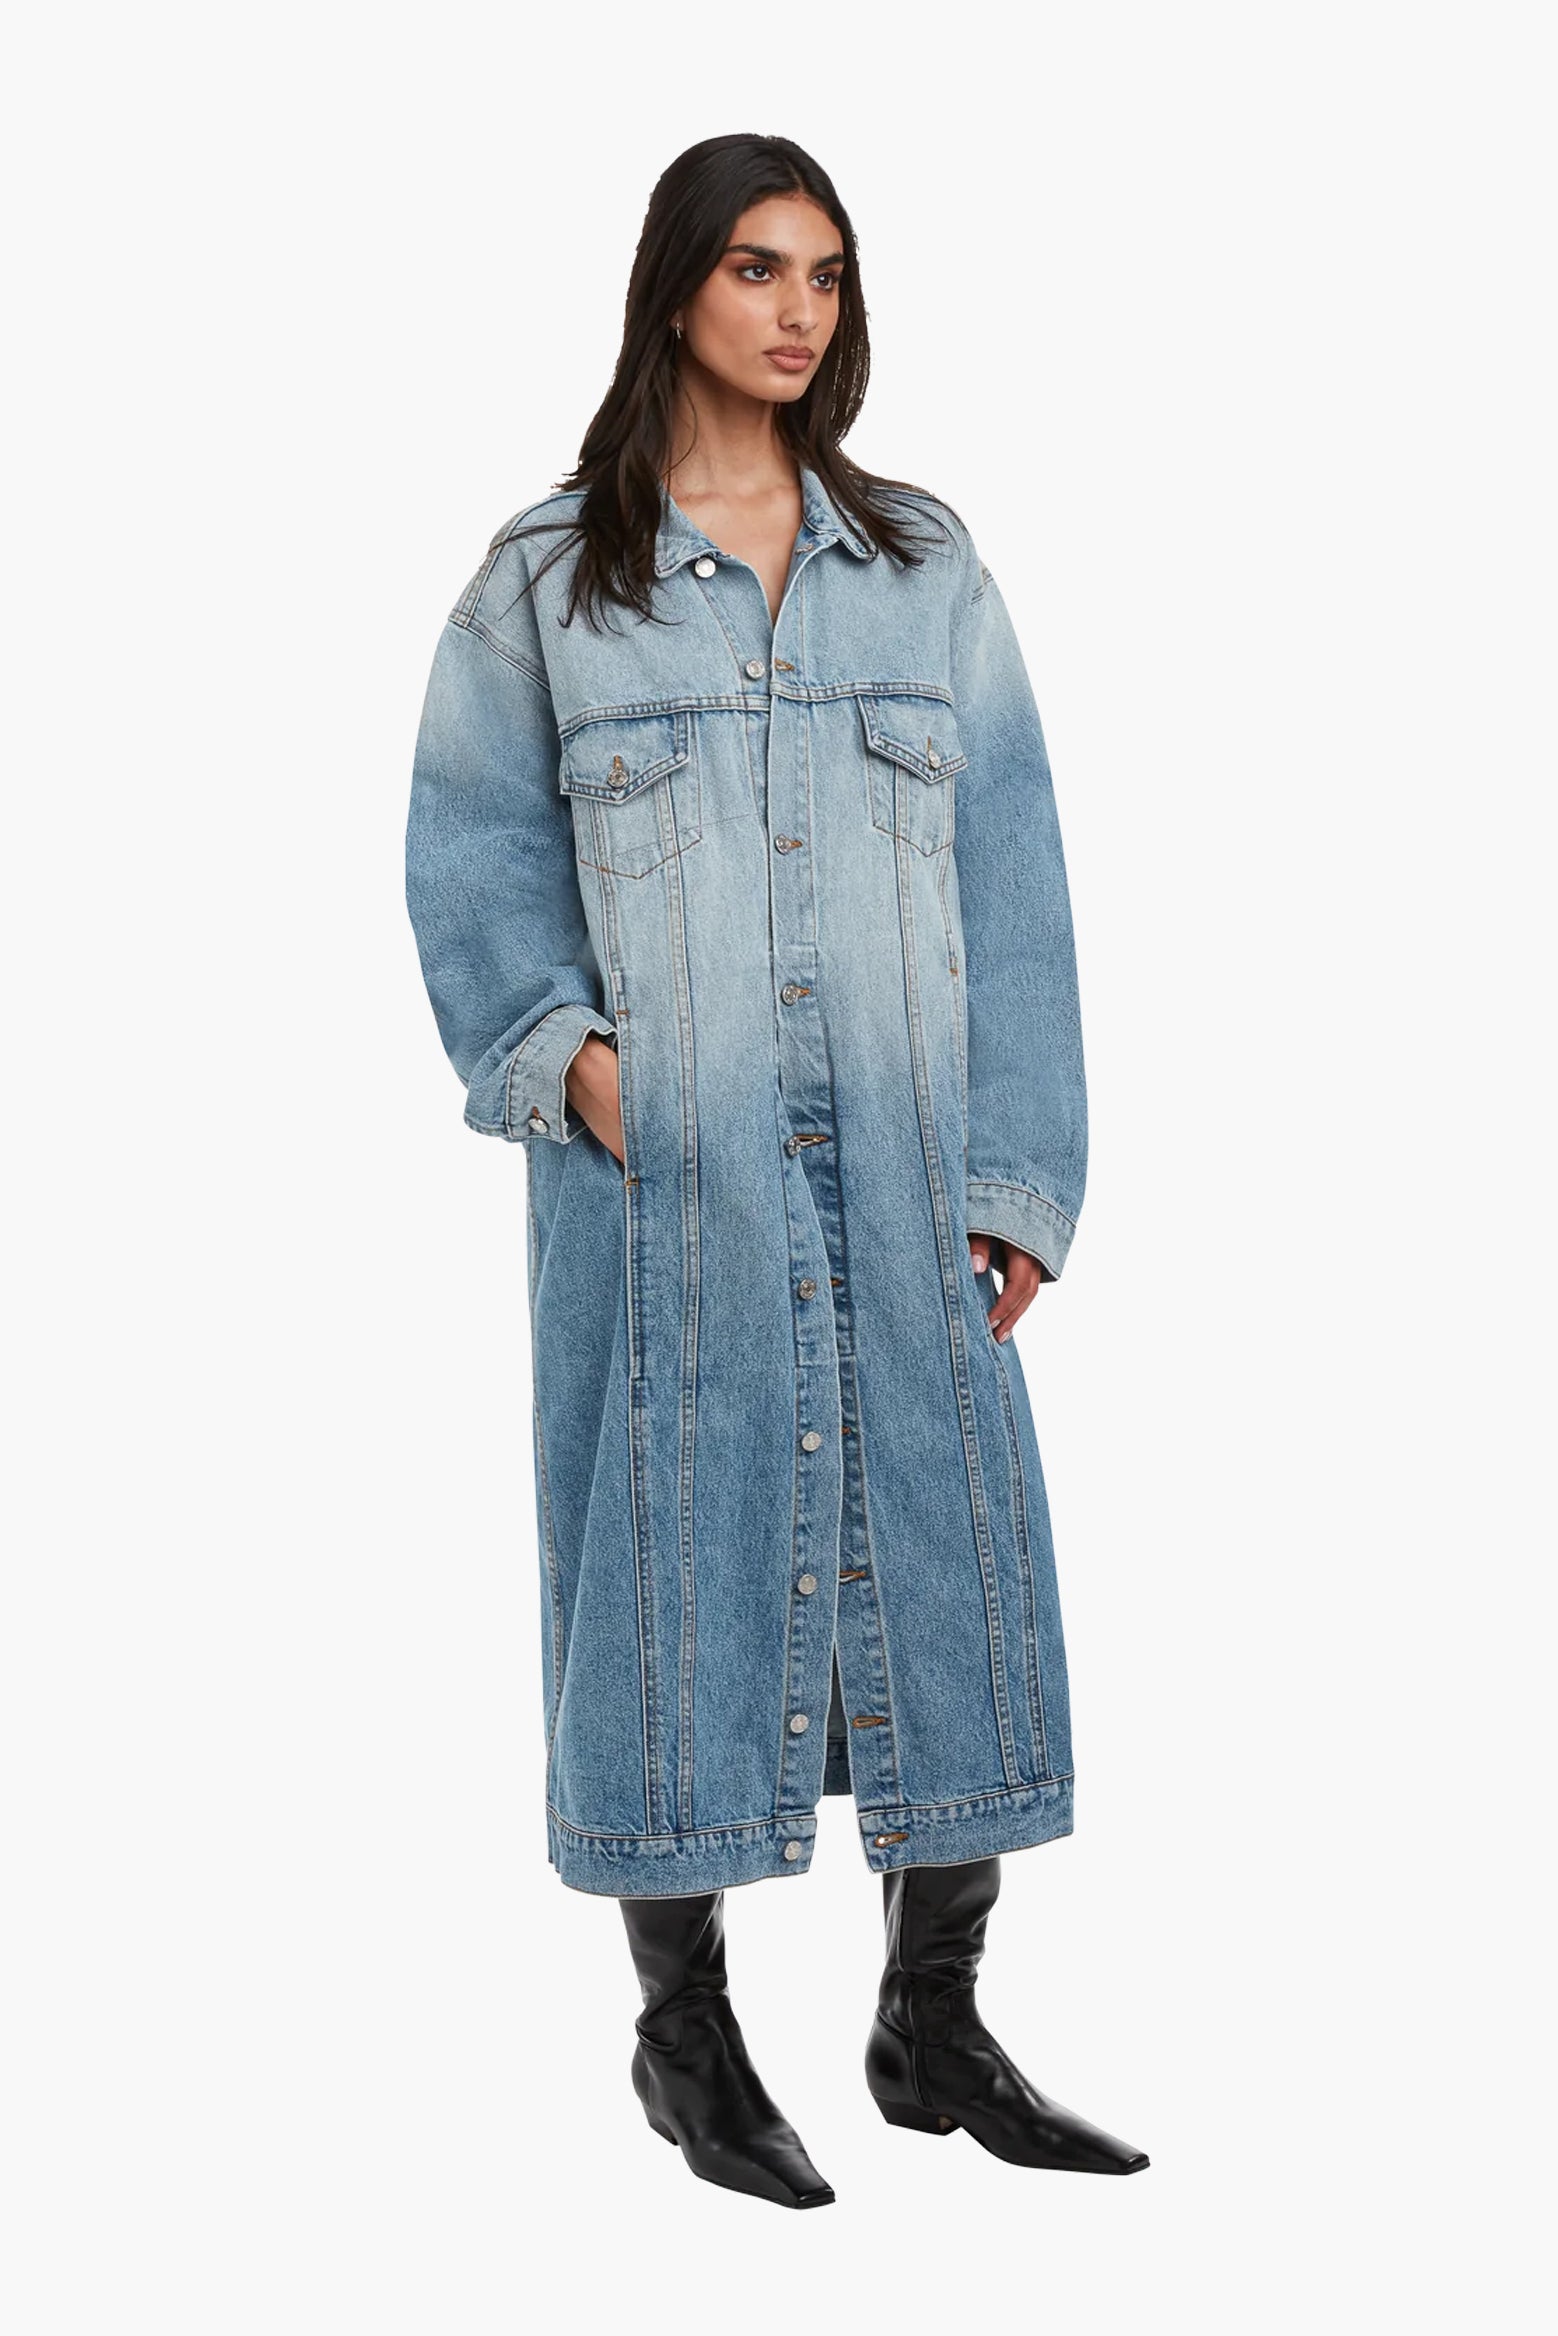 EB Denim Webster Trench in Luca available at The New Trend Australia.